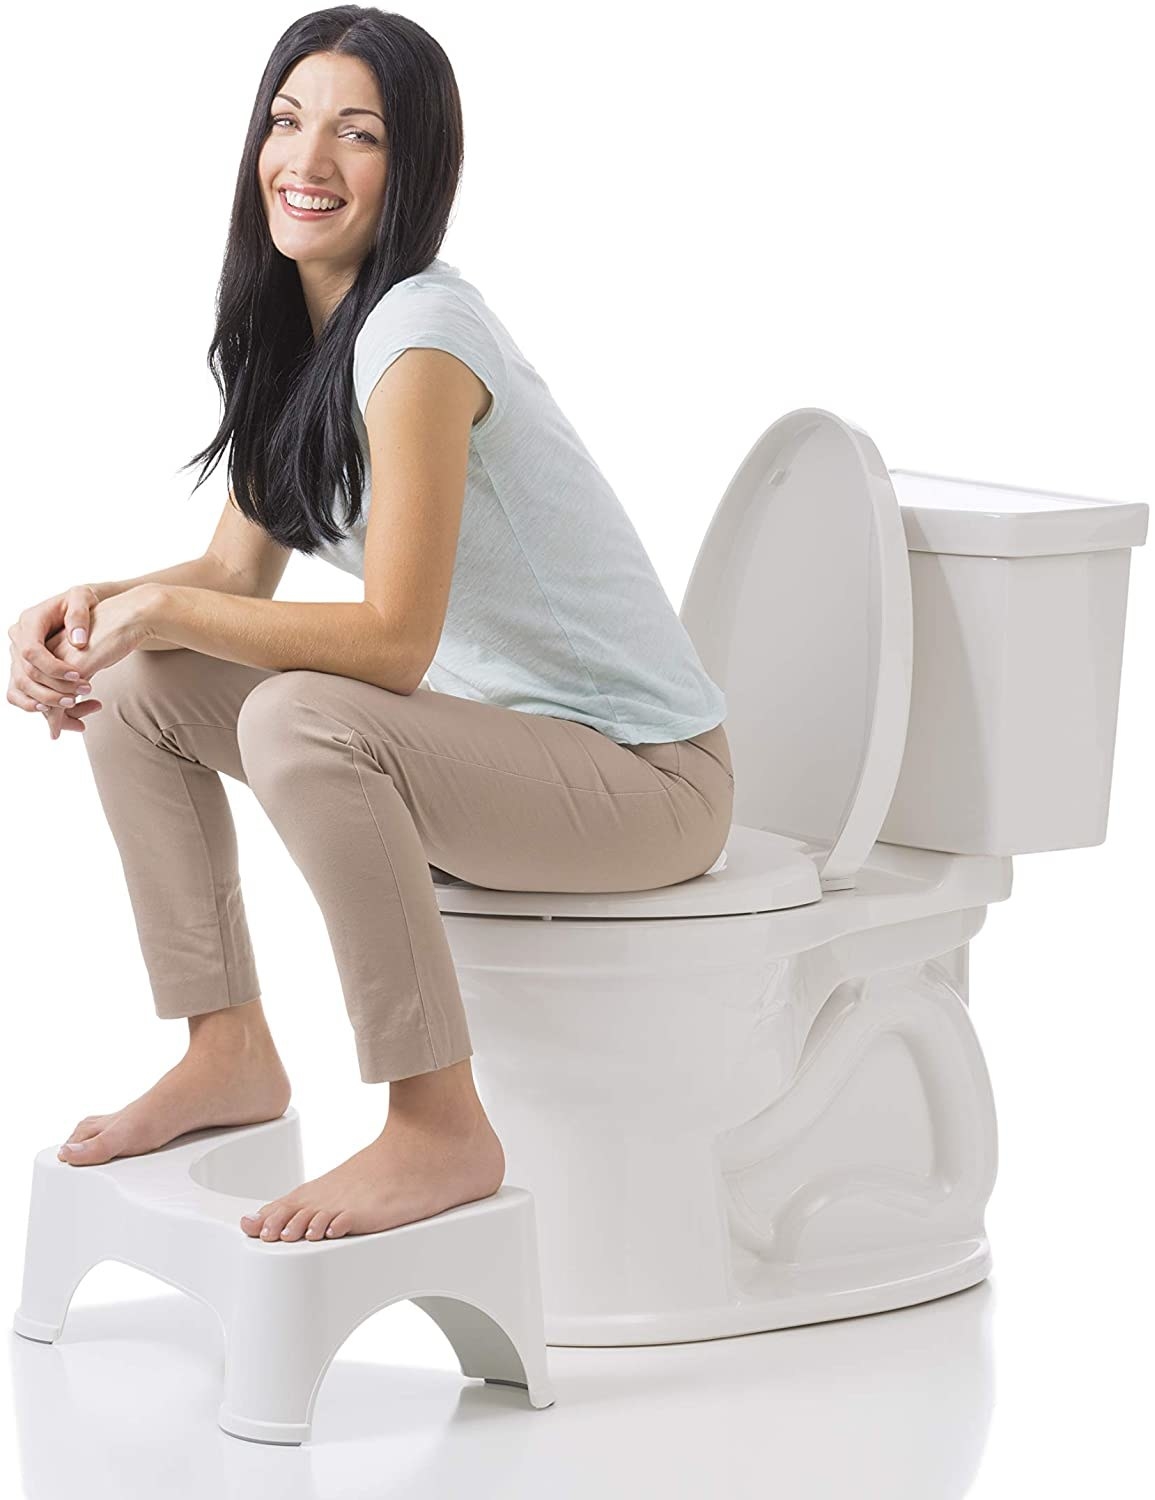 A model sitting on the toilet using the Squatty Potty, which is white and comes up to about half the height of the toilet. The model has their feet on either side of the stool